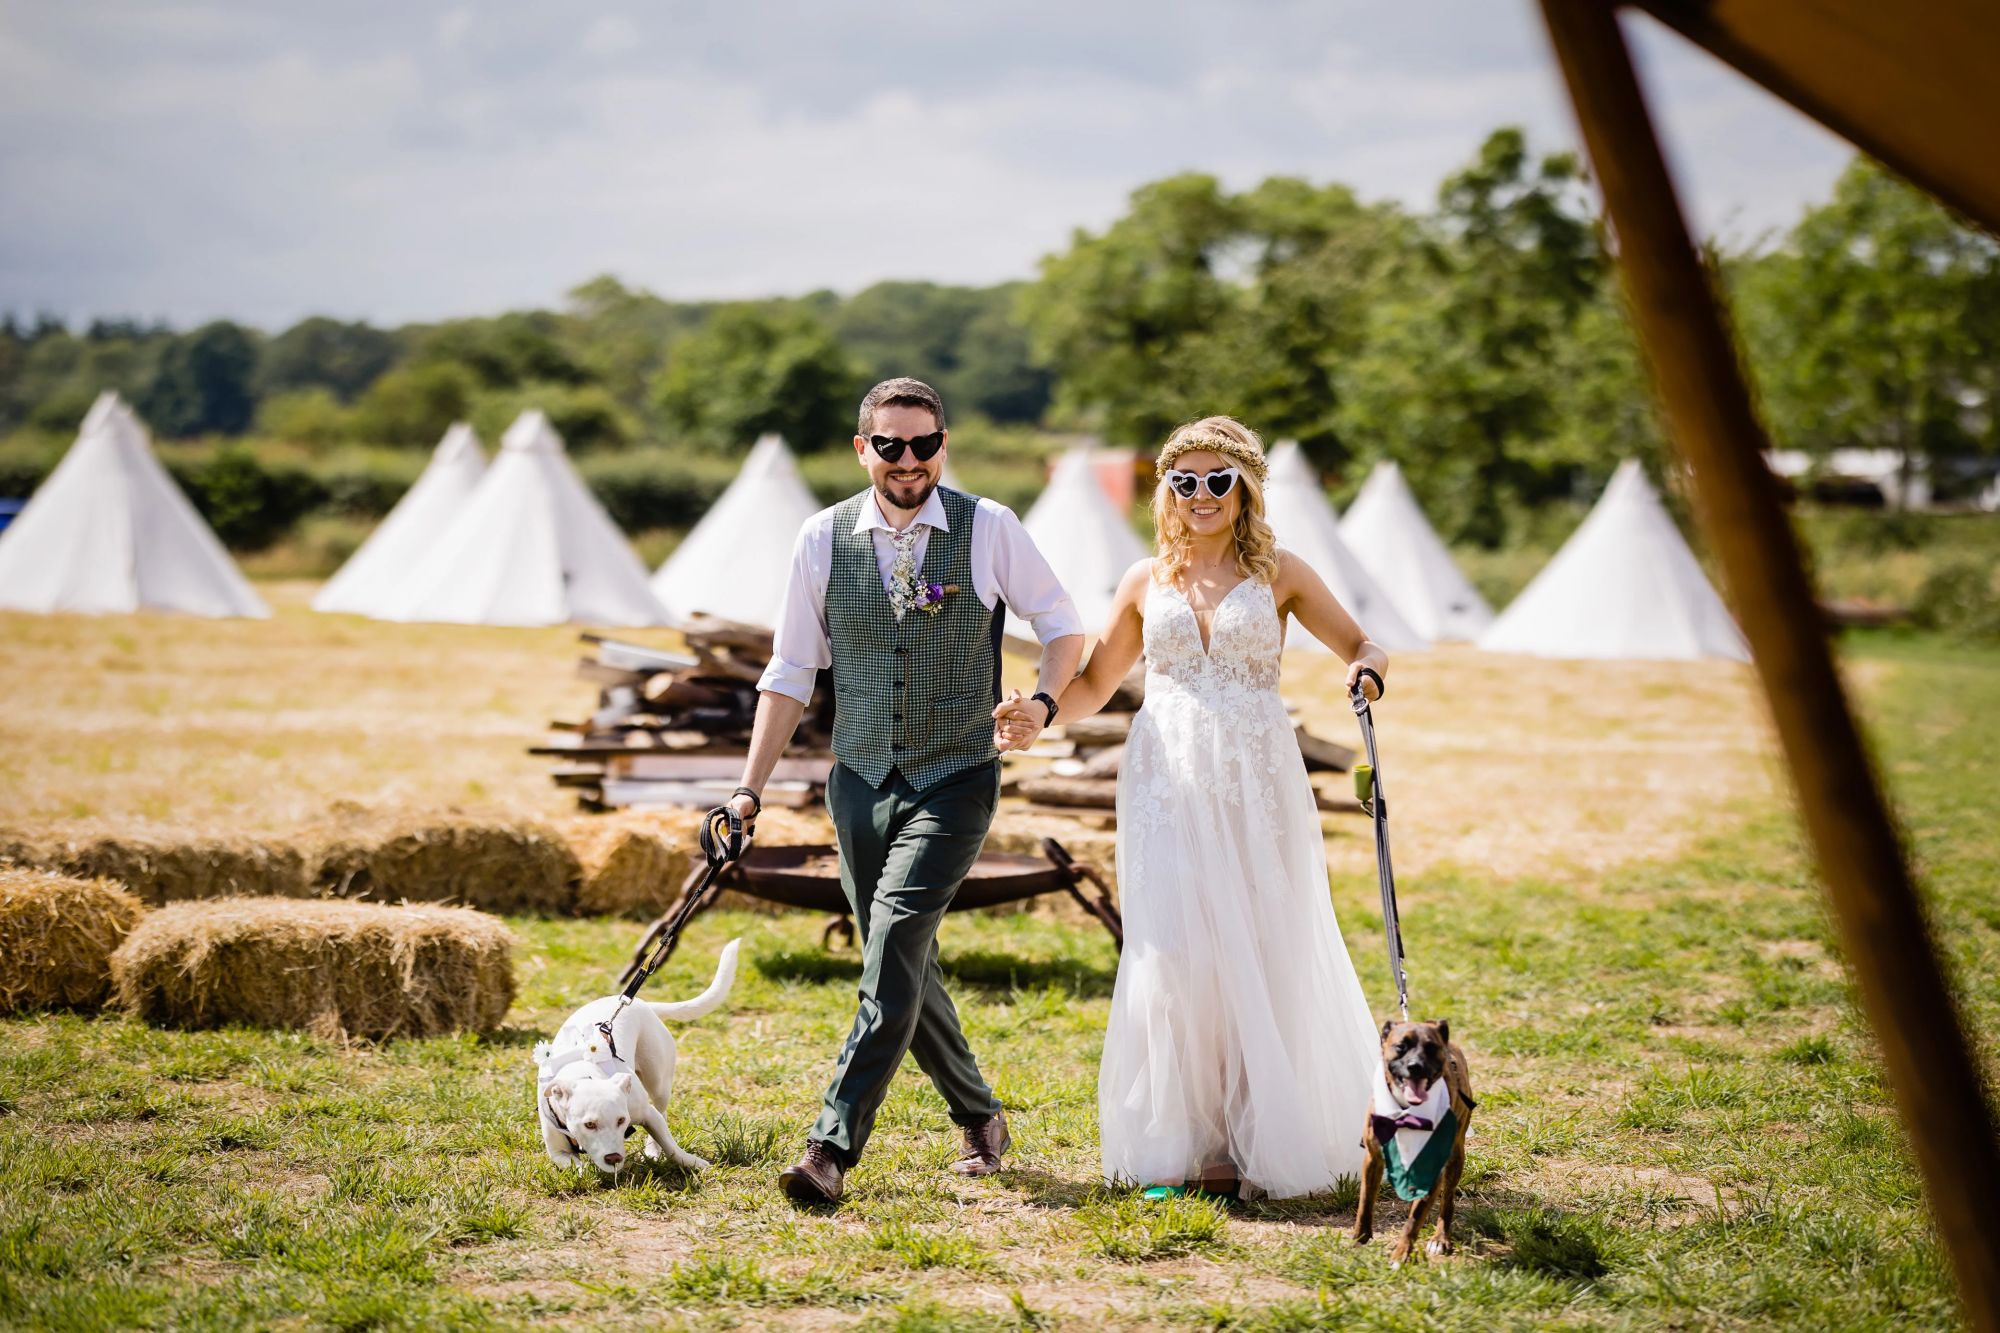 Boho styled bride & groom walk their dogs in a field in front of rows of white tents